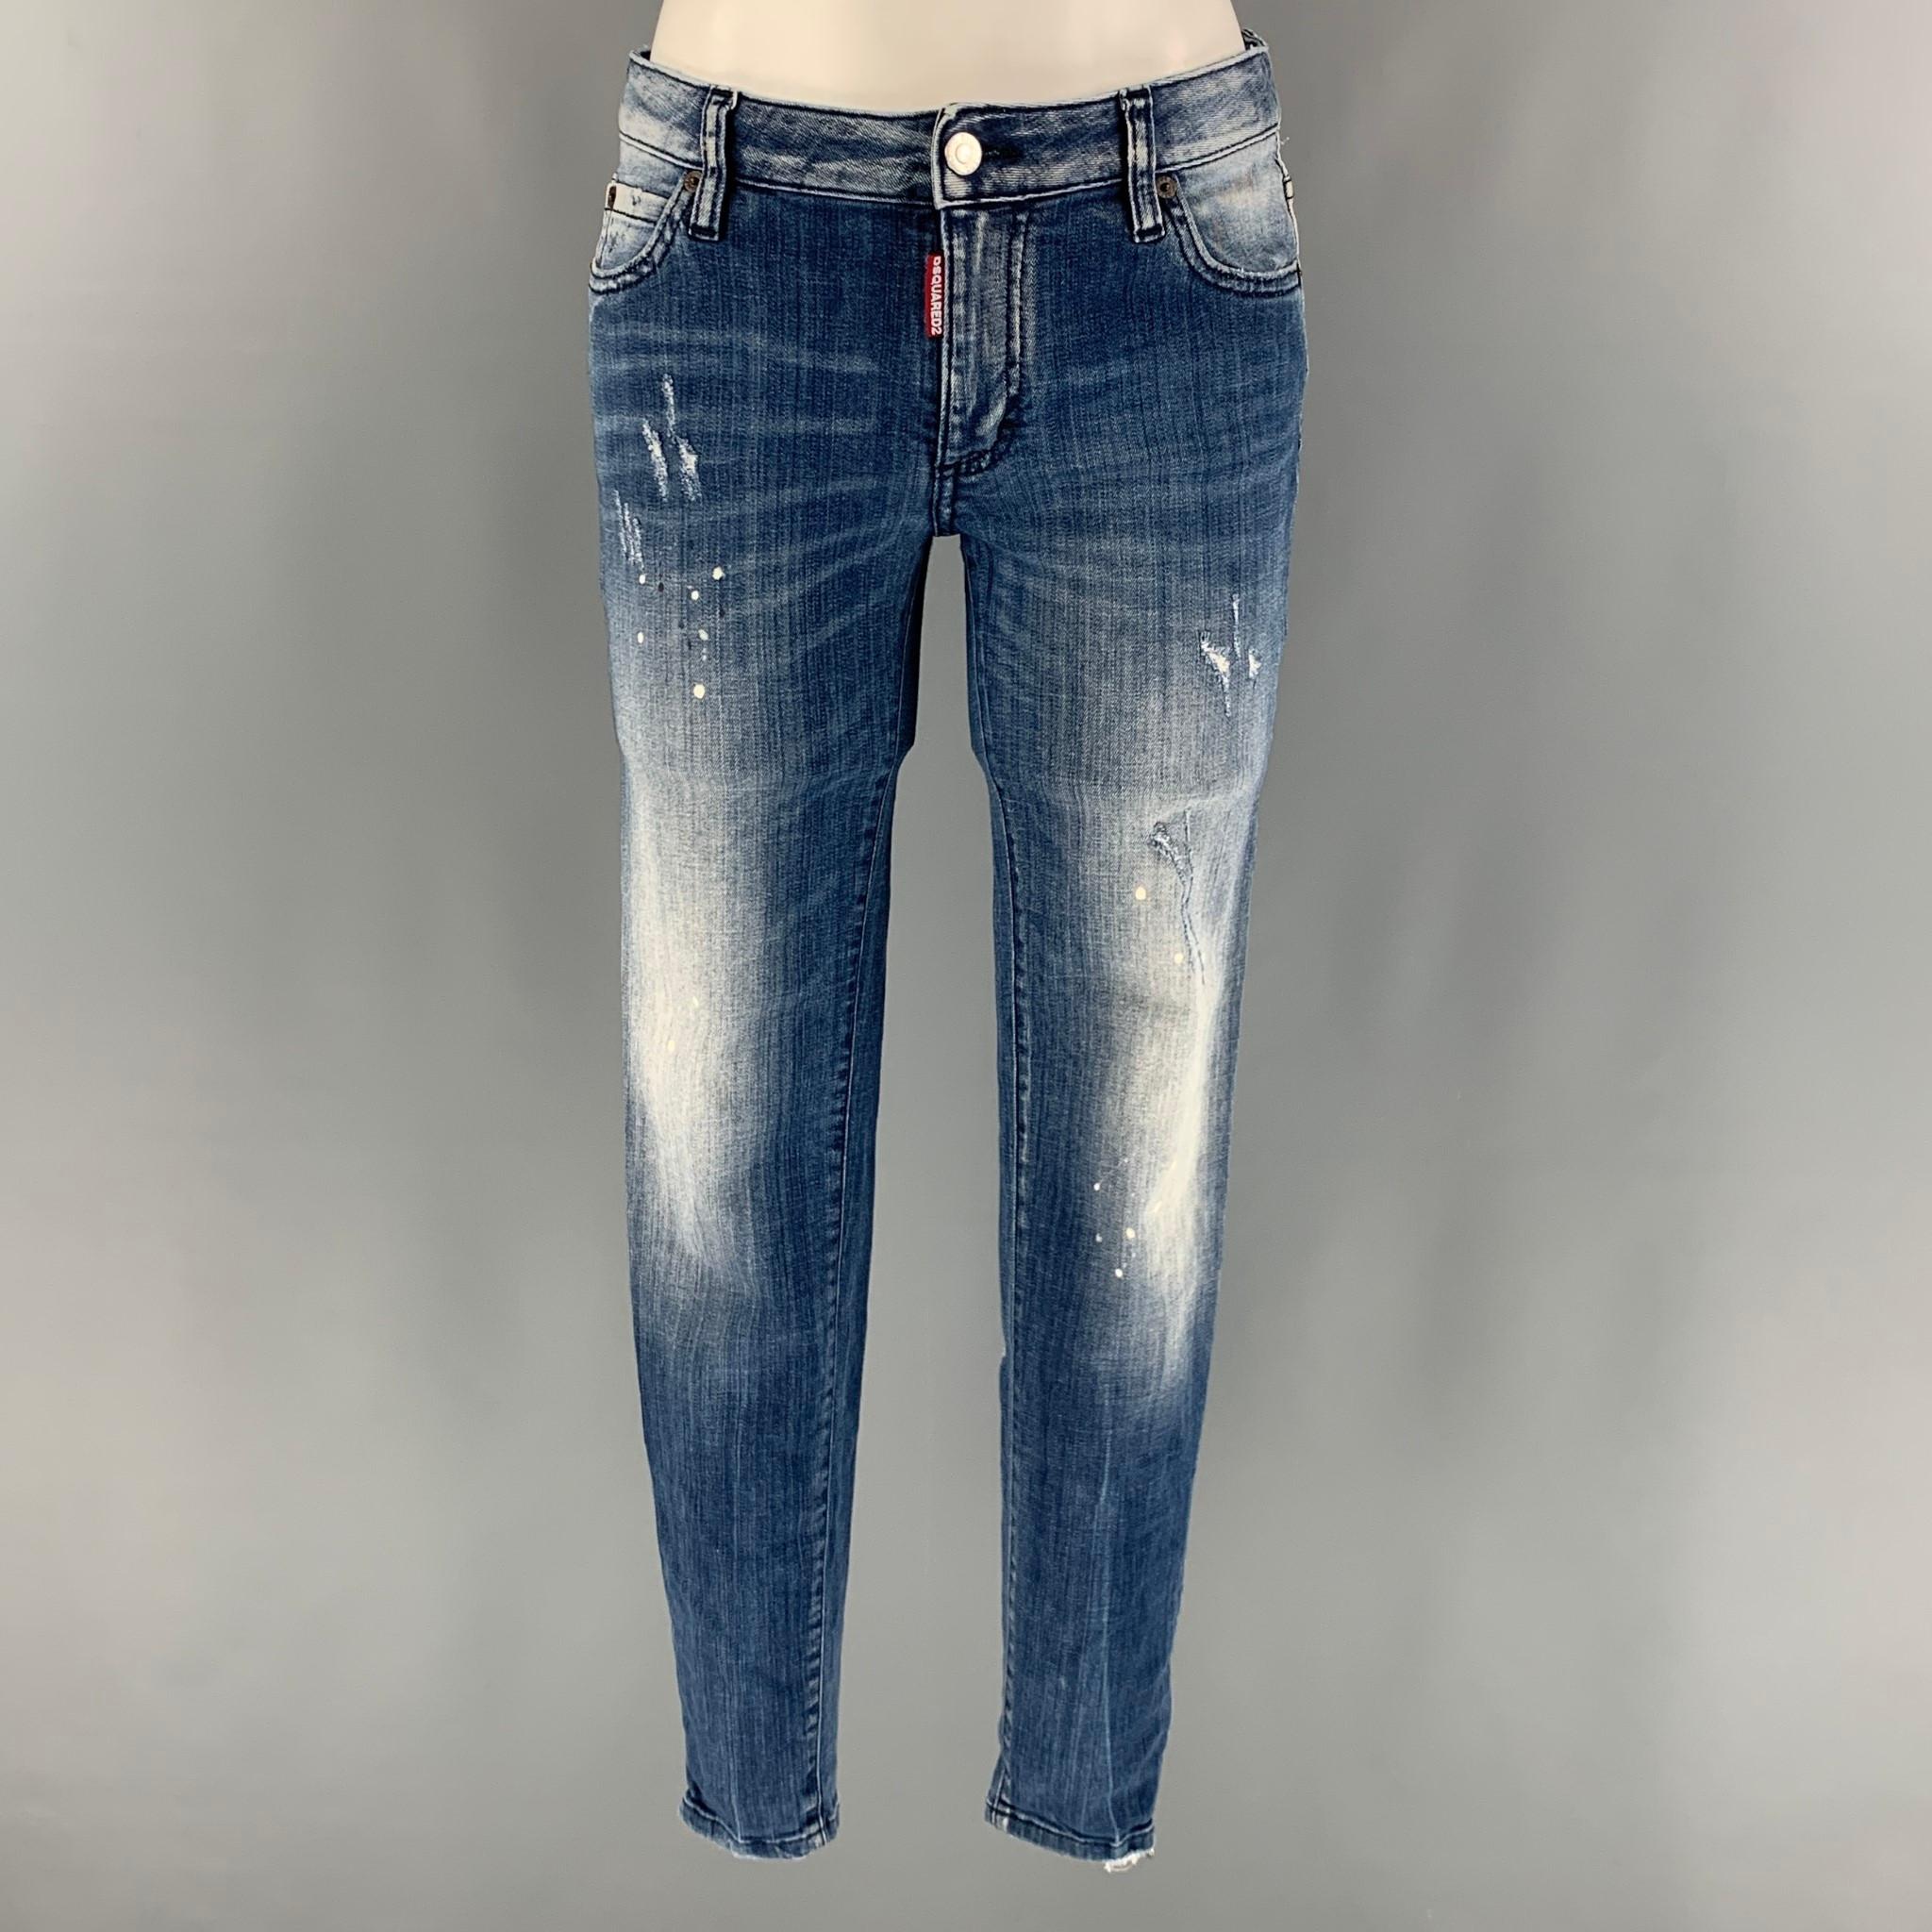 DSQUARED2 skinny jeans comes in a blue cotton and elastane denim featuring a low rise, paint splatter details, and a zipper fly closure. Made in Italy.

Very Good Pre- Conditions.
Marked: 42

Measurements:

Waist: 30 in.
Rise: 7 in.
Inseam: 28 in.  